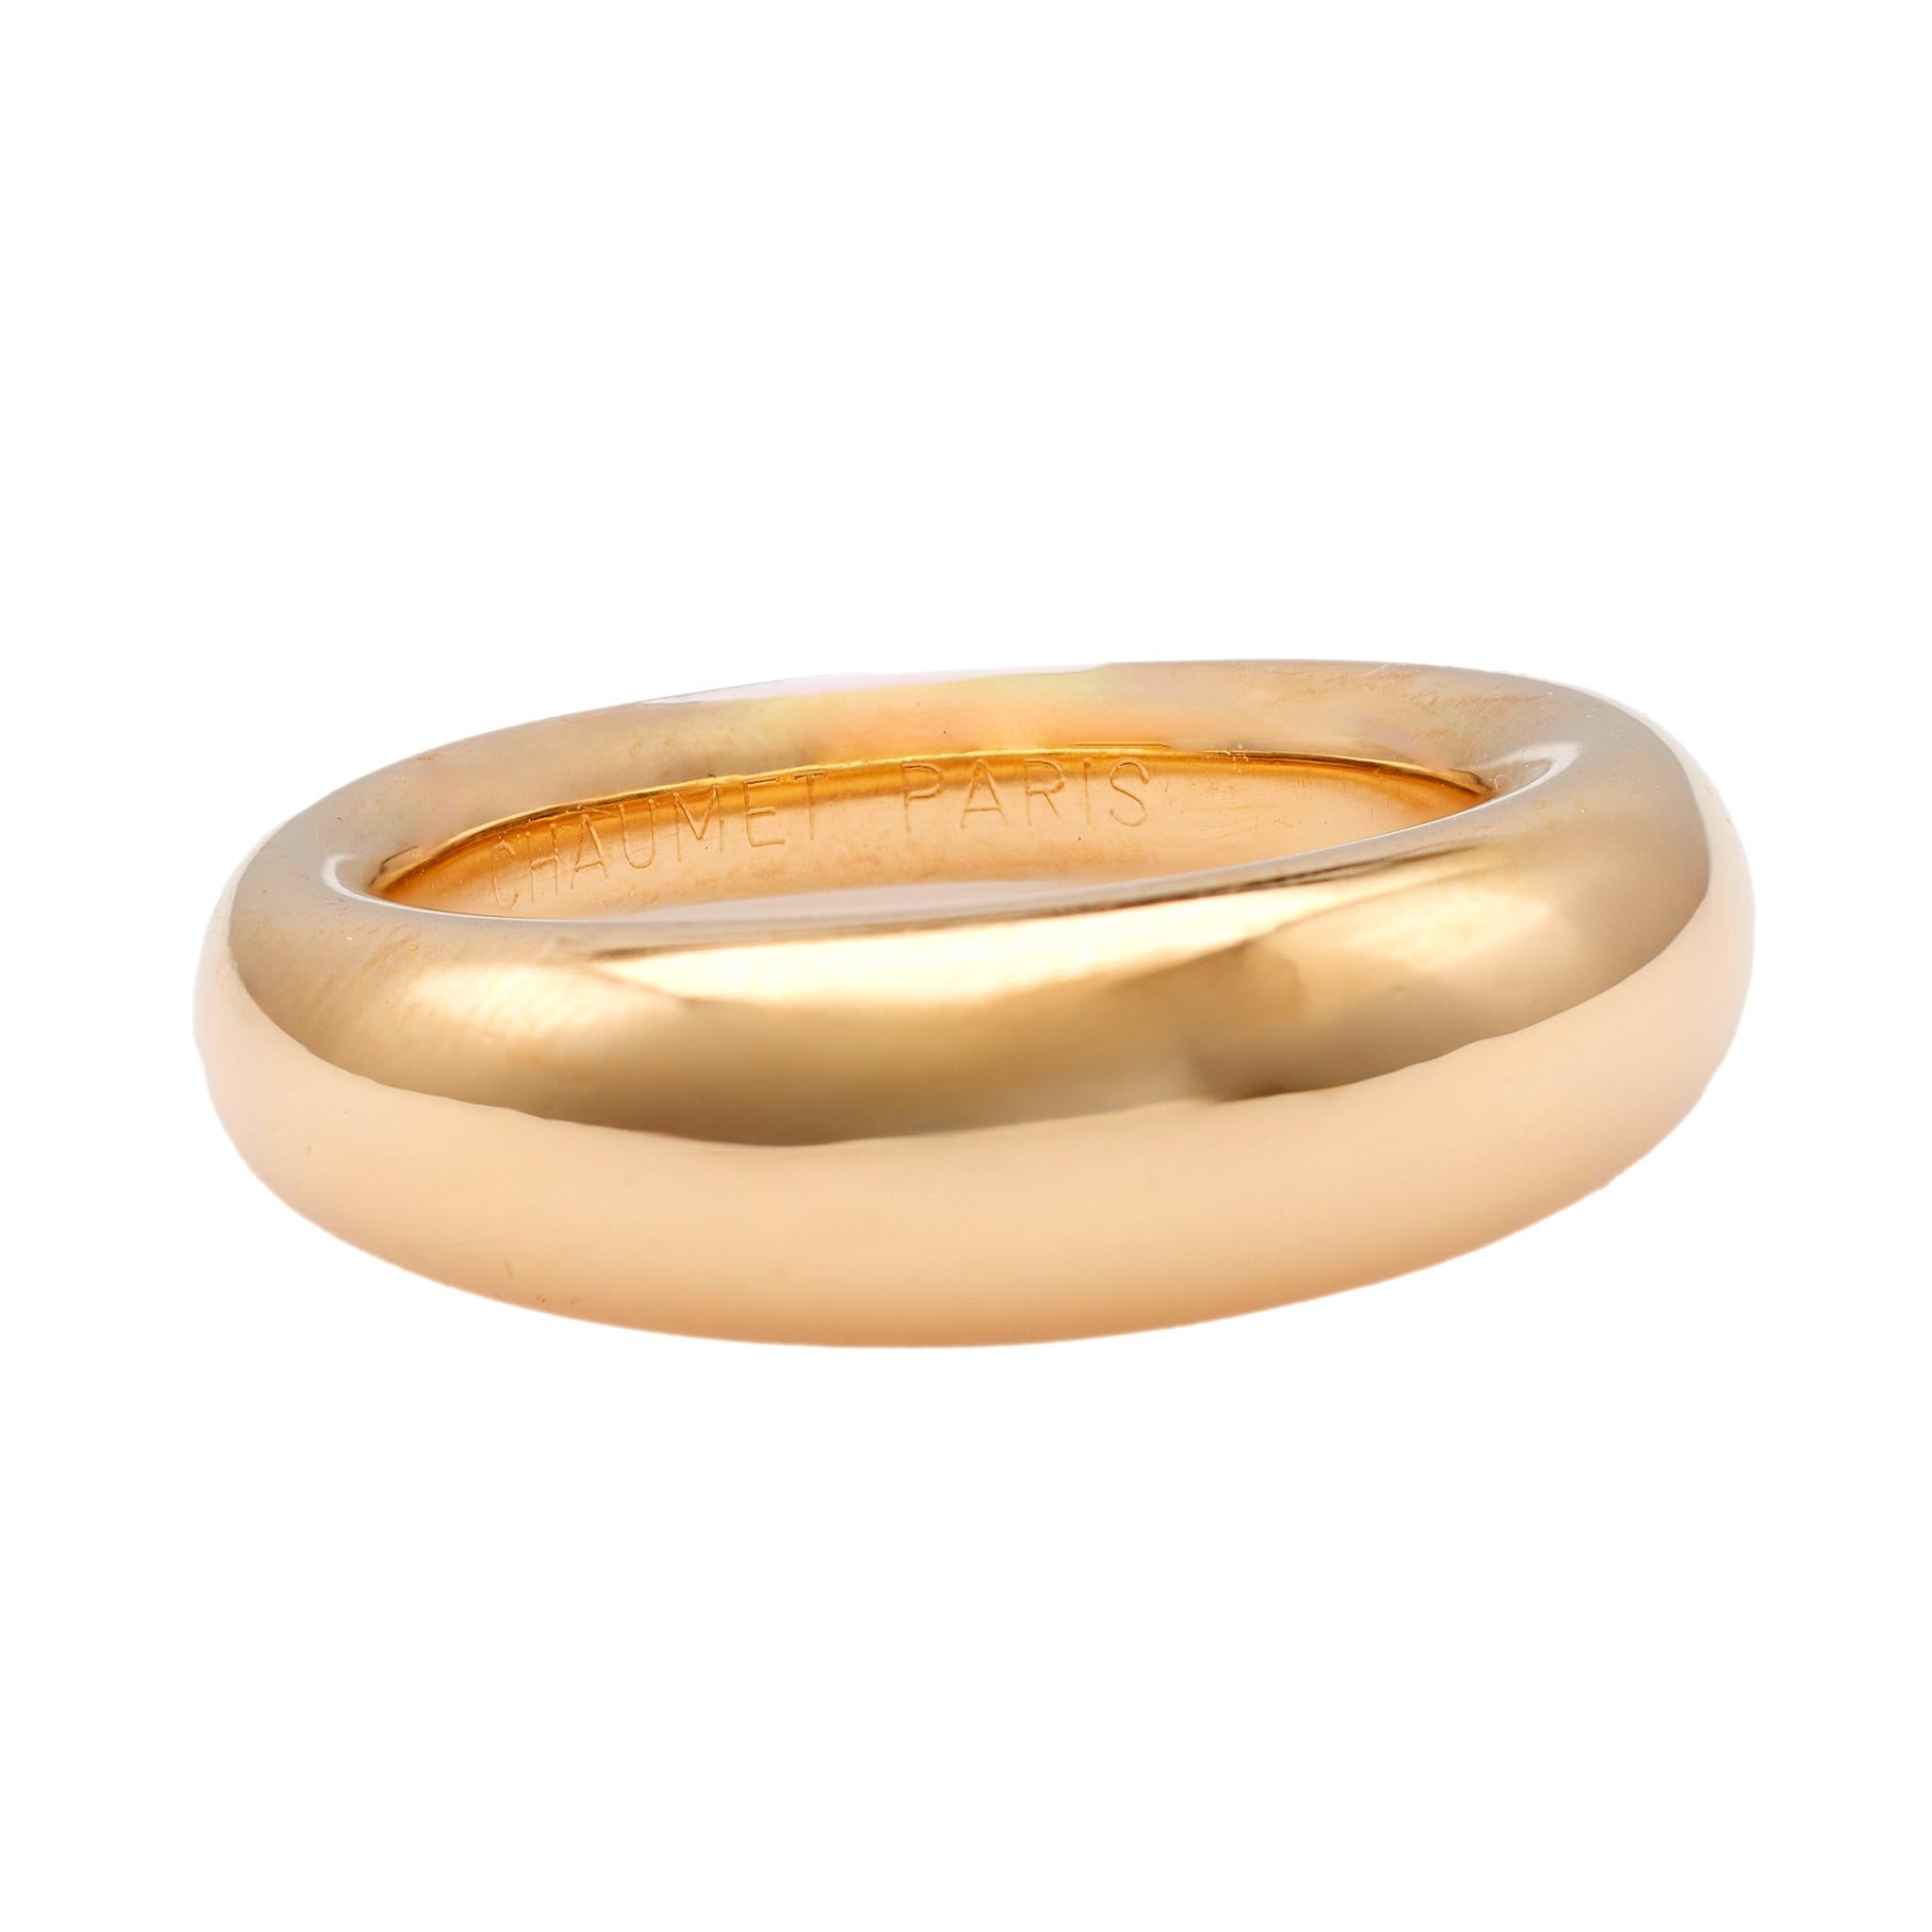 Women's or Men's Vintage Chaumet 18k Yellow Gold Anneau Dome Ring For Sale